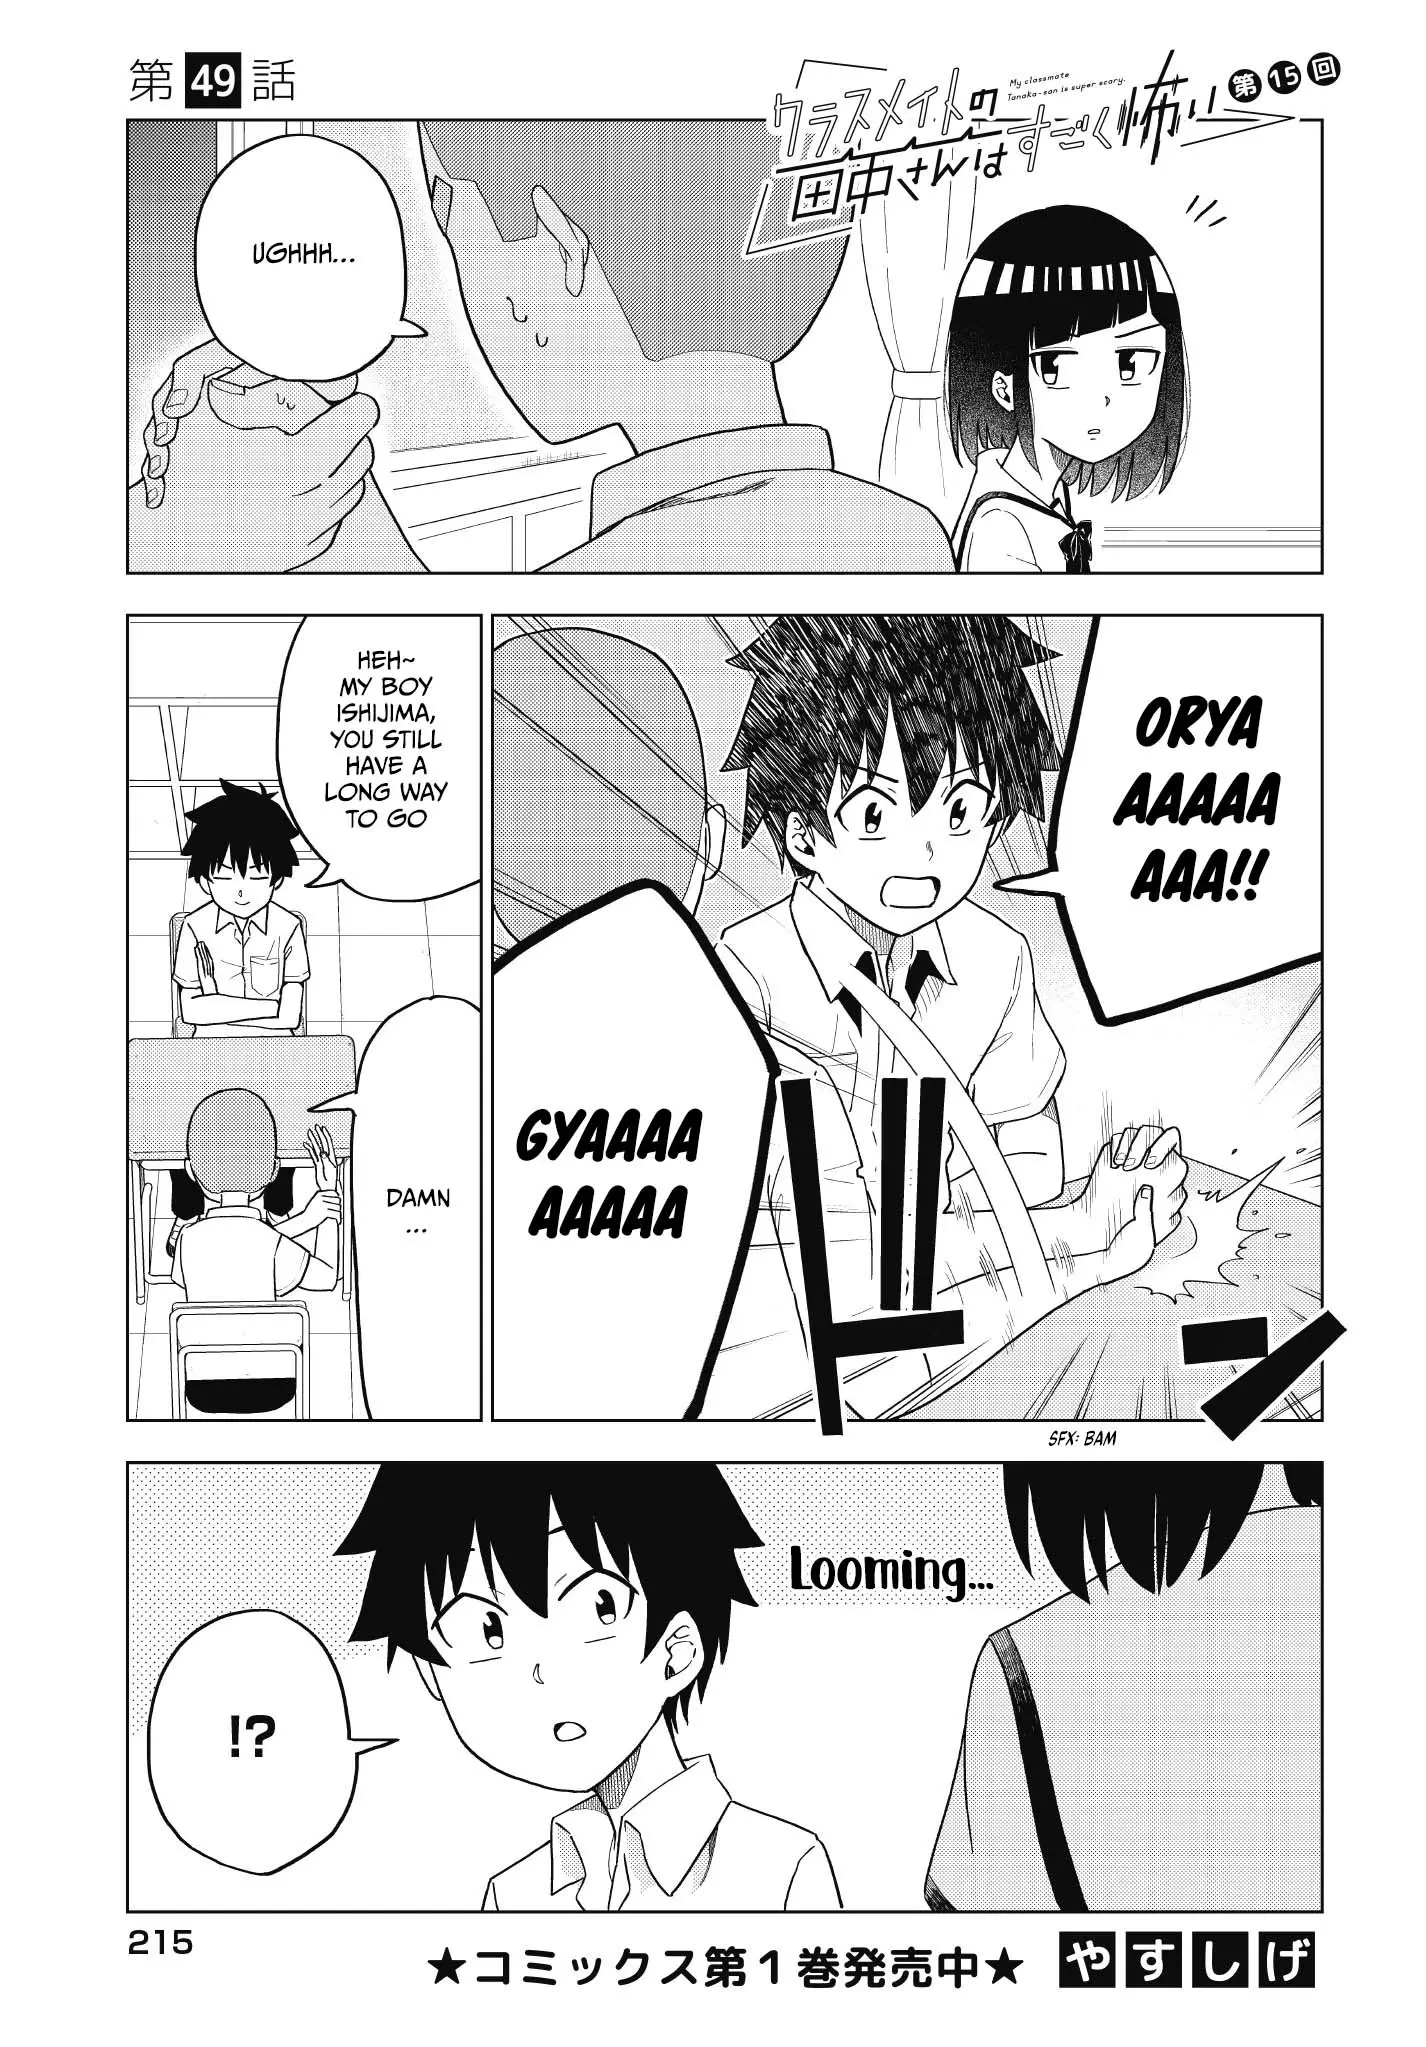 My Classmate Tanaka-San Is Super Scary - 49 page 2